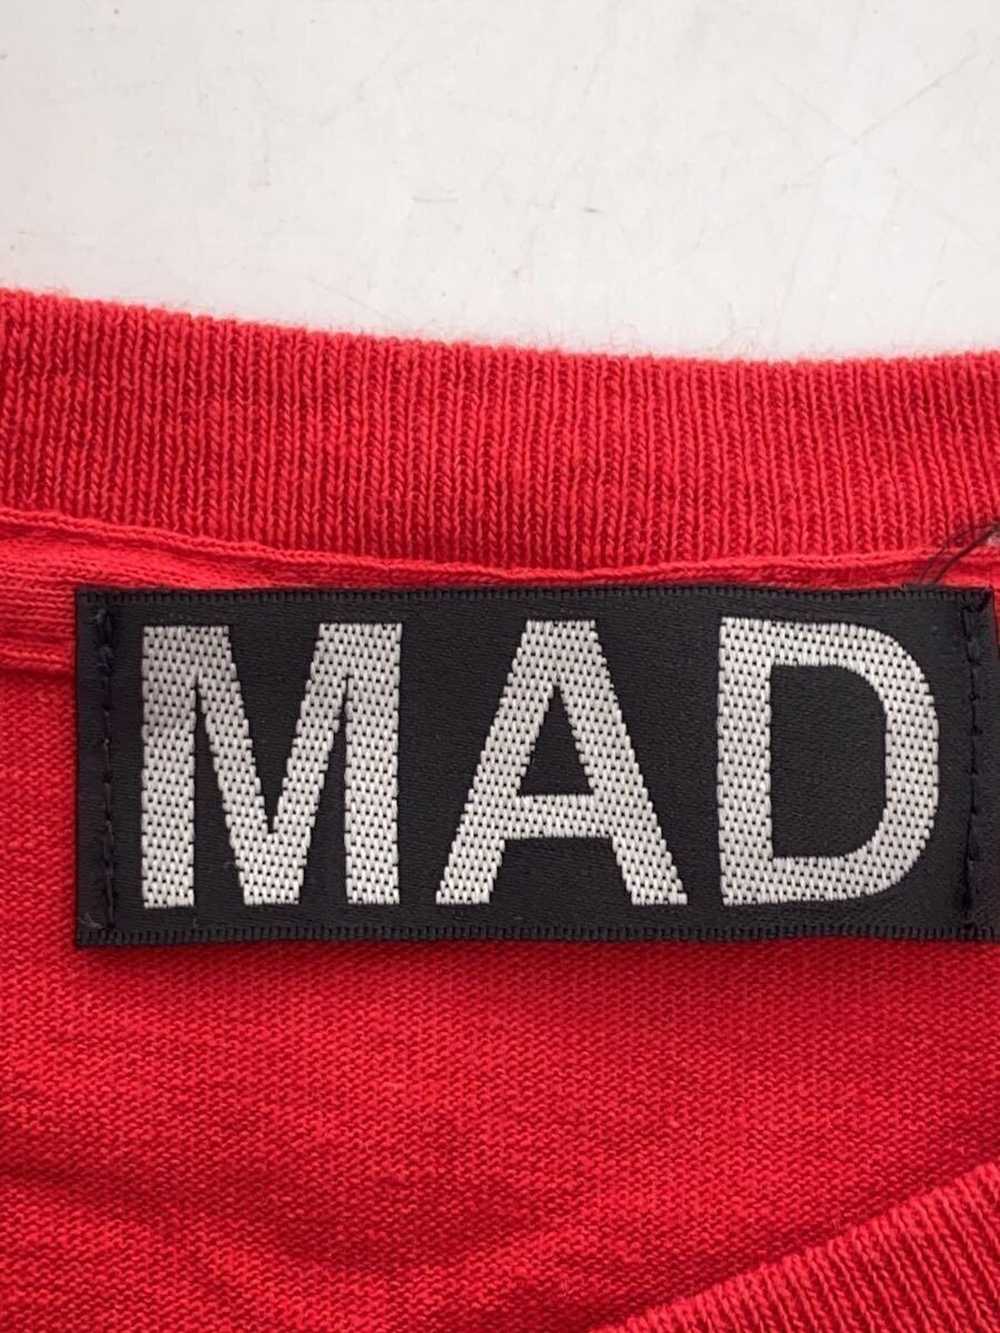 Undercover MAD Store Tee - image 4